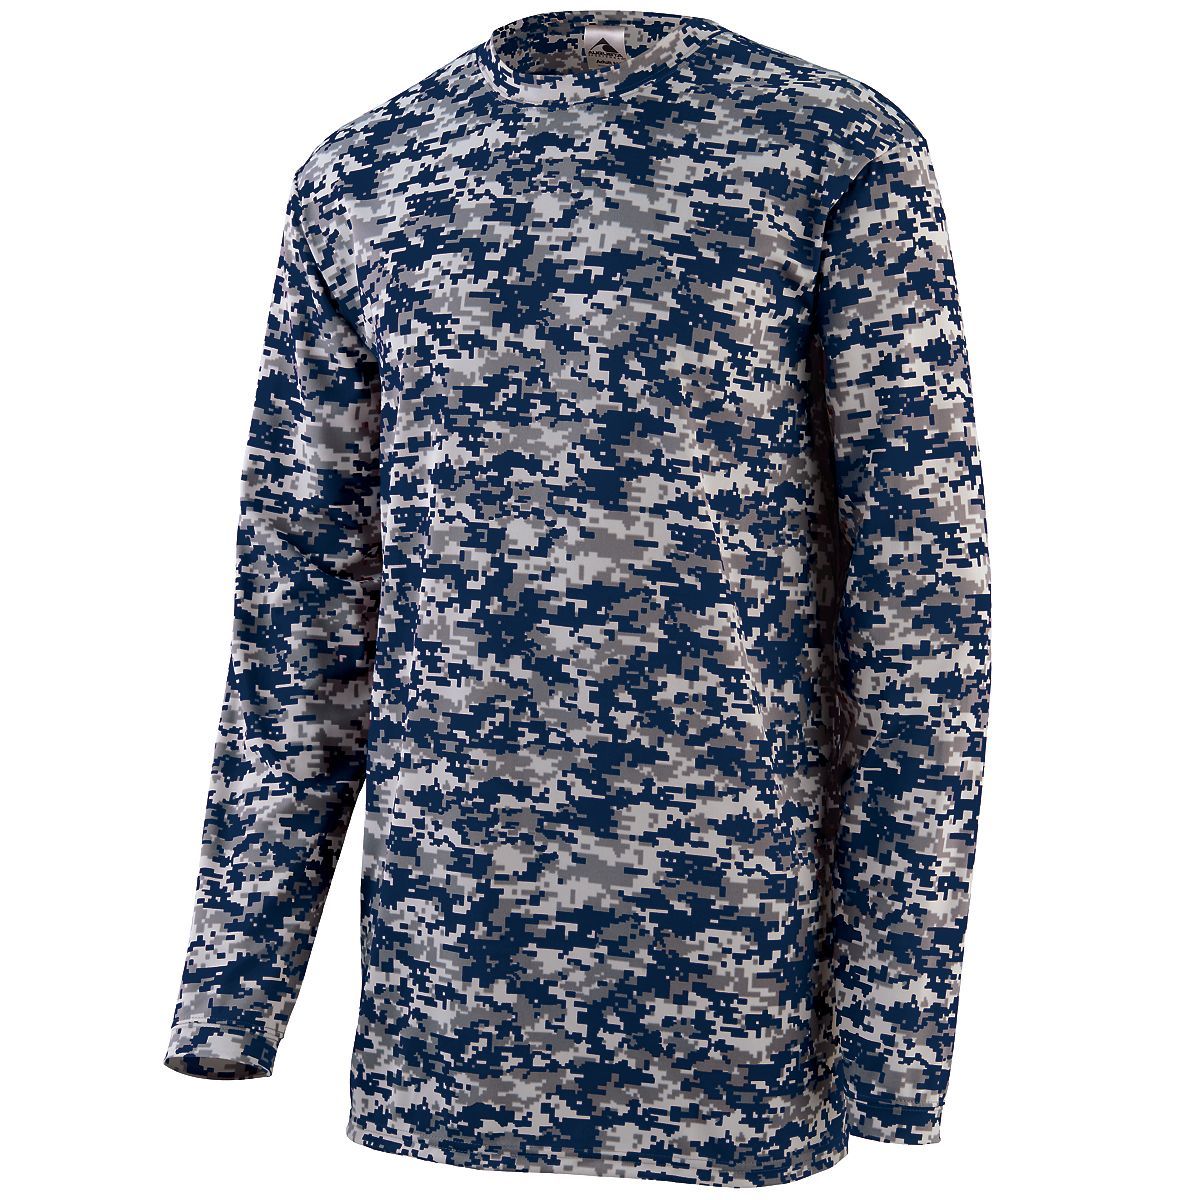 Augusta Sportswear Digi Camo Wicking Long Sleeve T-Shirt in Navy Digi  -Part of the Adult, Adult-Tee-Shirt, T-Shirts, Augusta-Products, Shirts product lines at KanaleyCreations.com